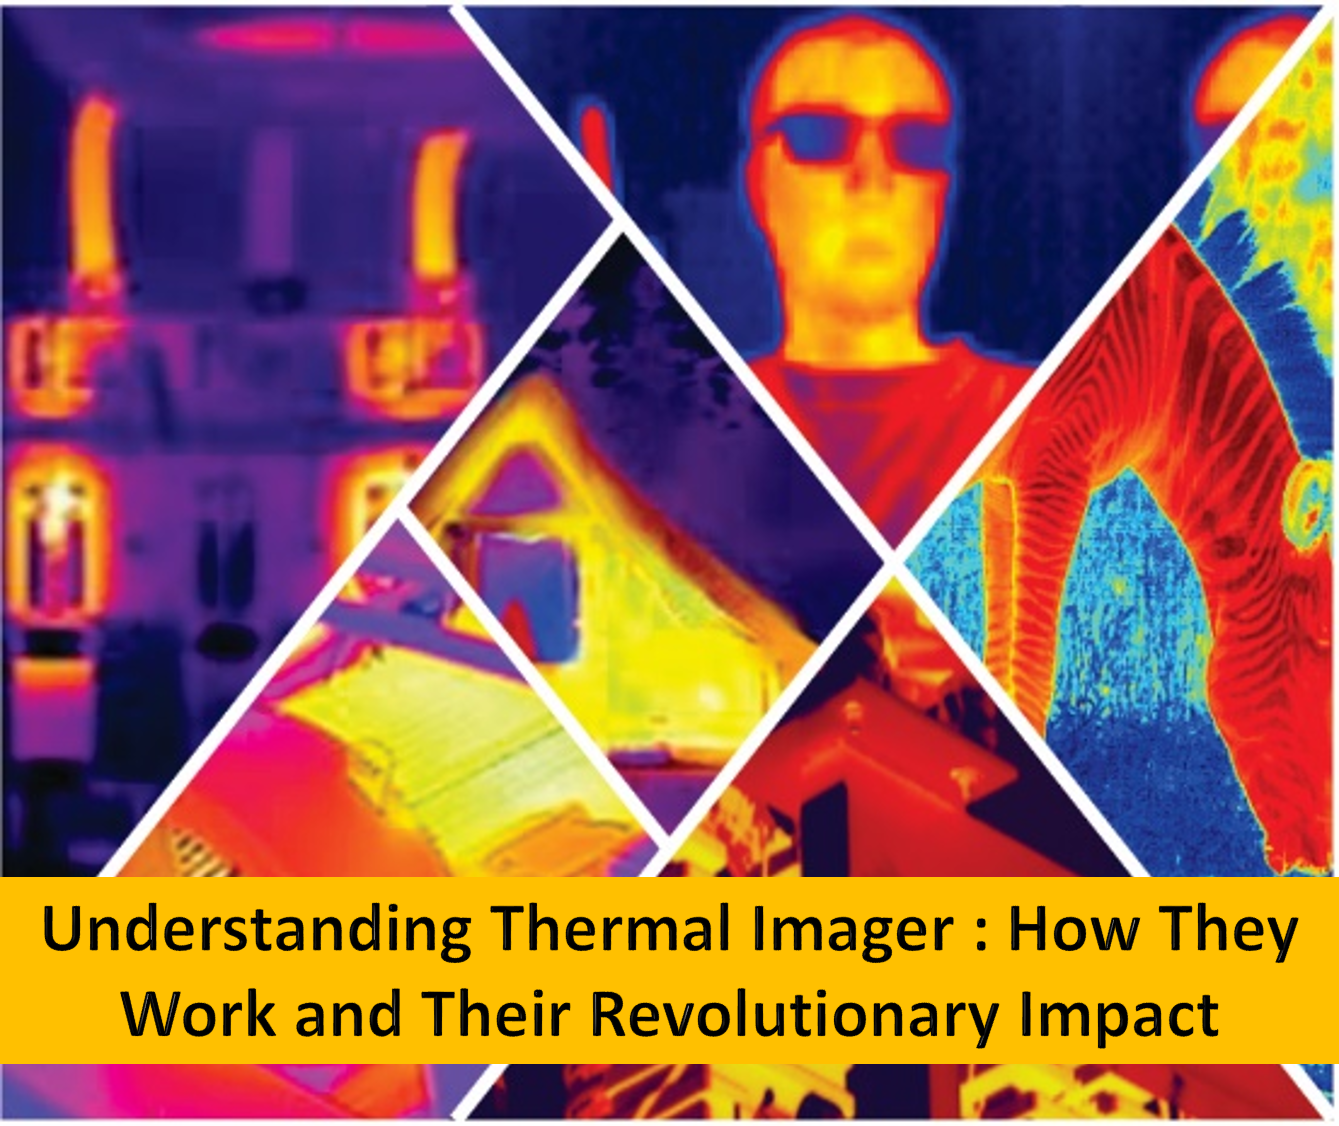 Understanding Thermal Imagers: How They Work and Their Revolutionary Impact